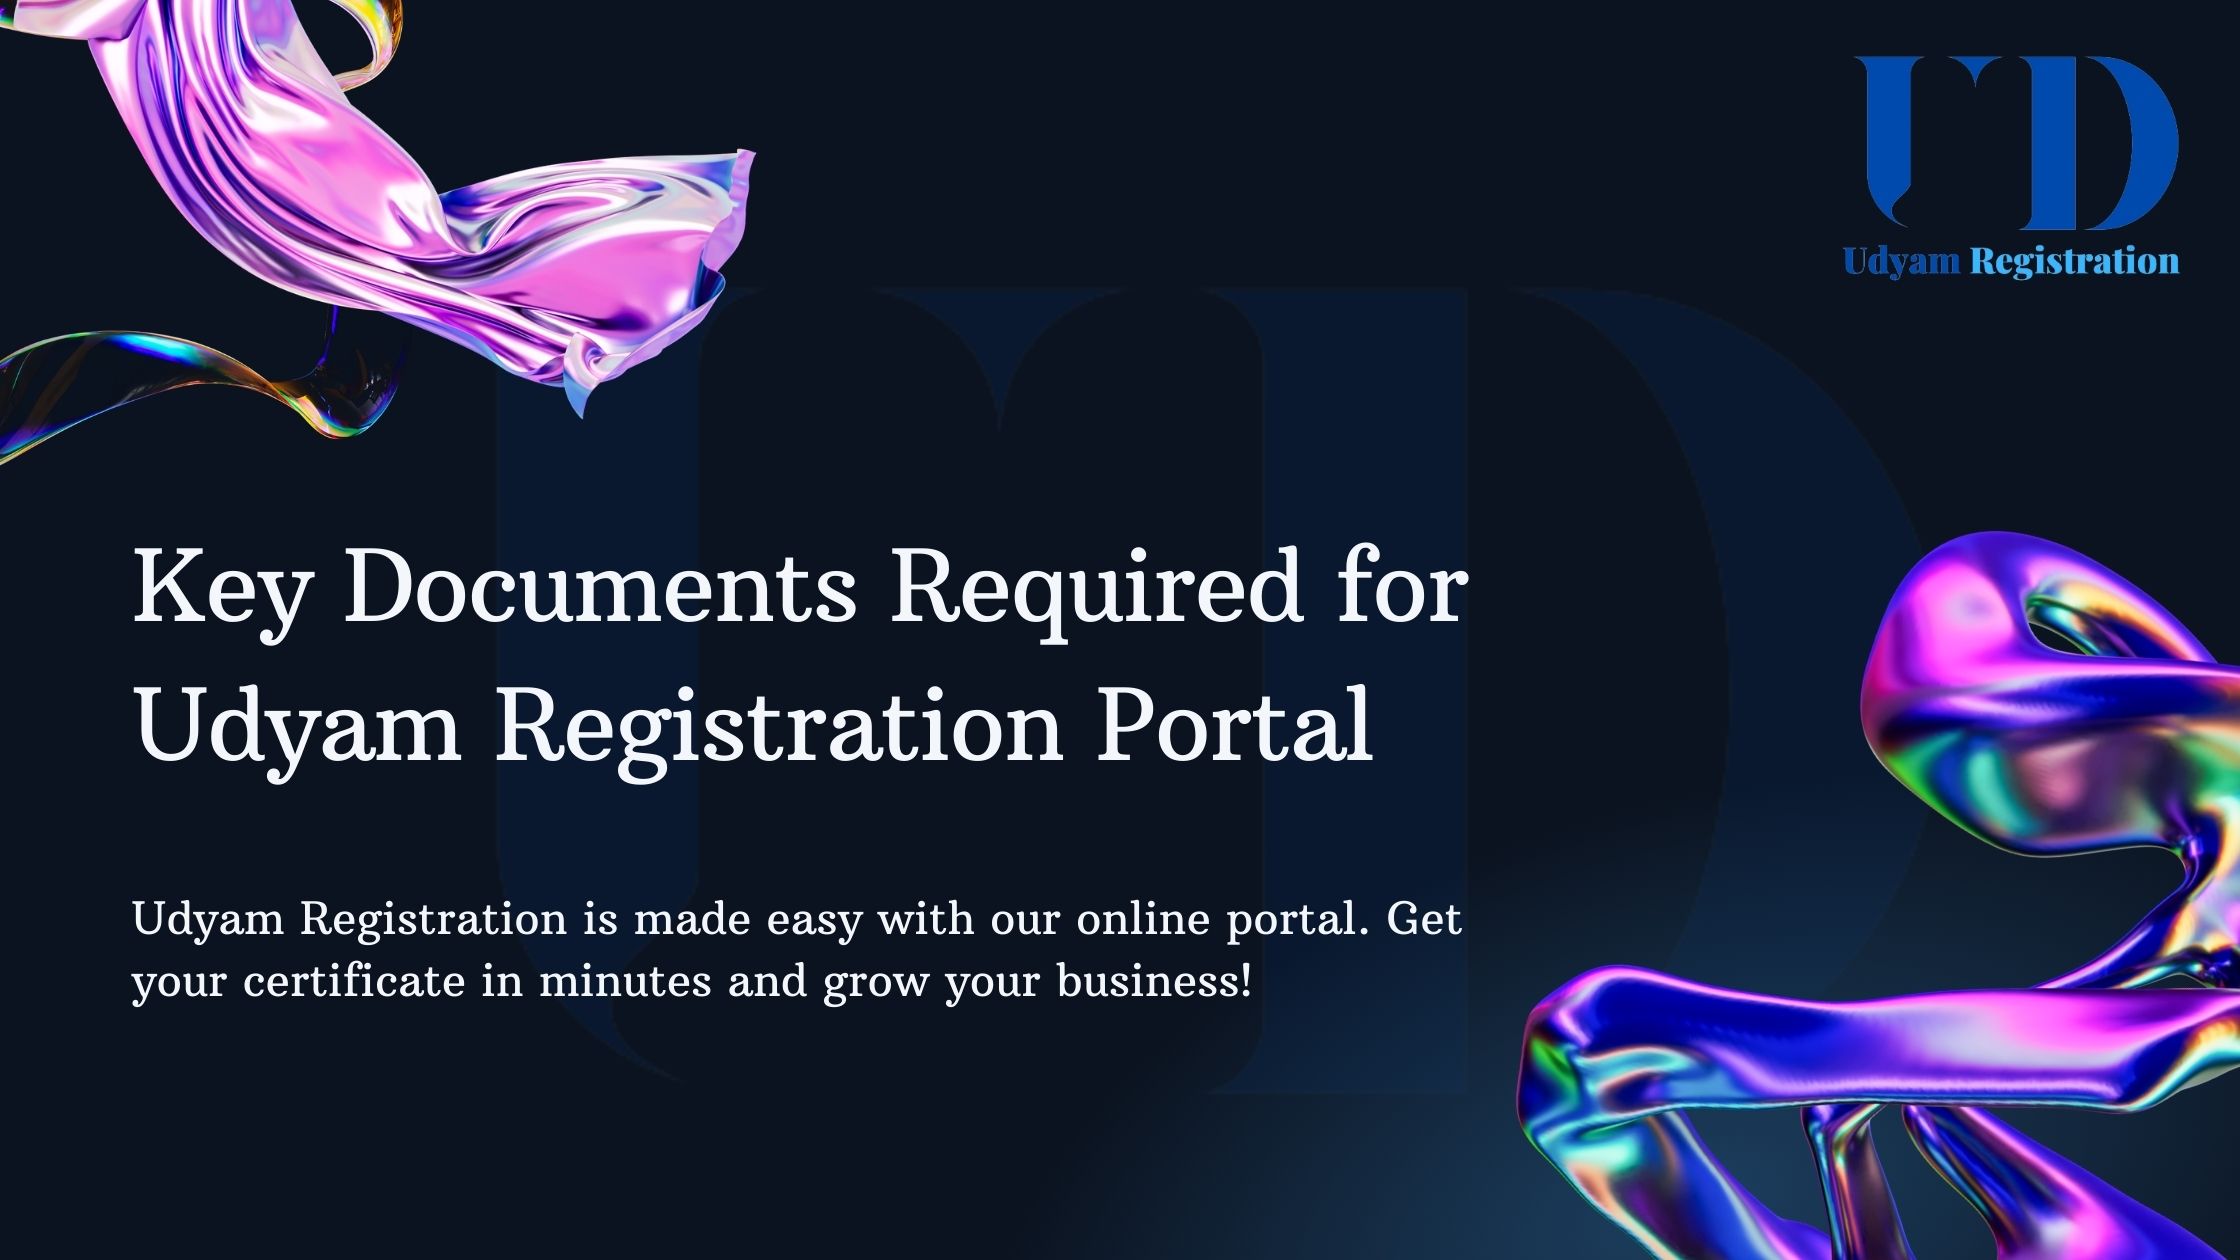 Key Documents Required for Udyam Registration Portal